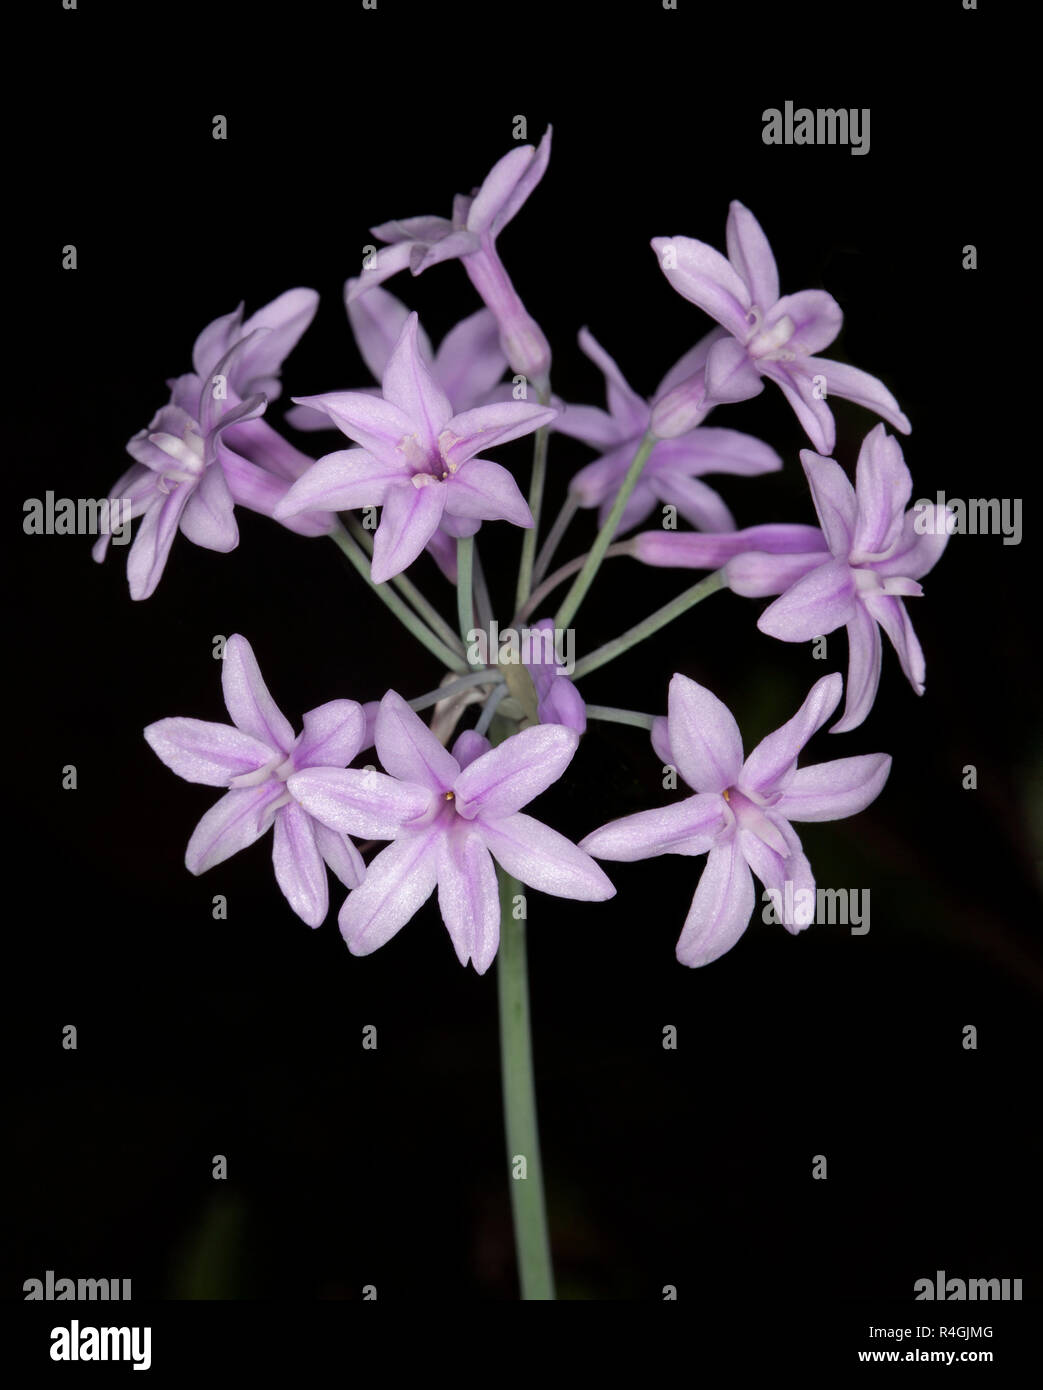 Cluster of star-shaped pale mauve / pink flowers of Tulbaghia violaceae, society garlic, on black background Stock Photo